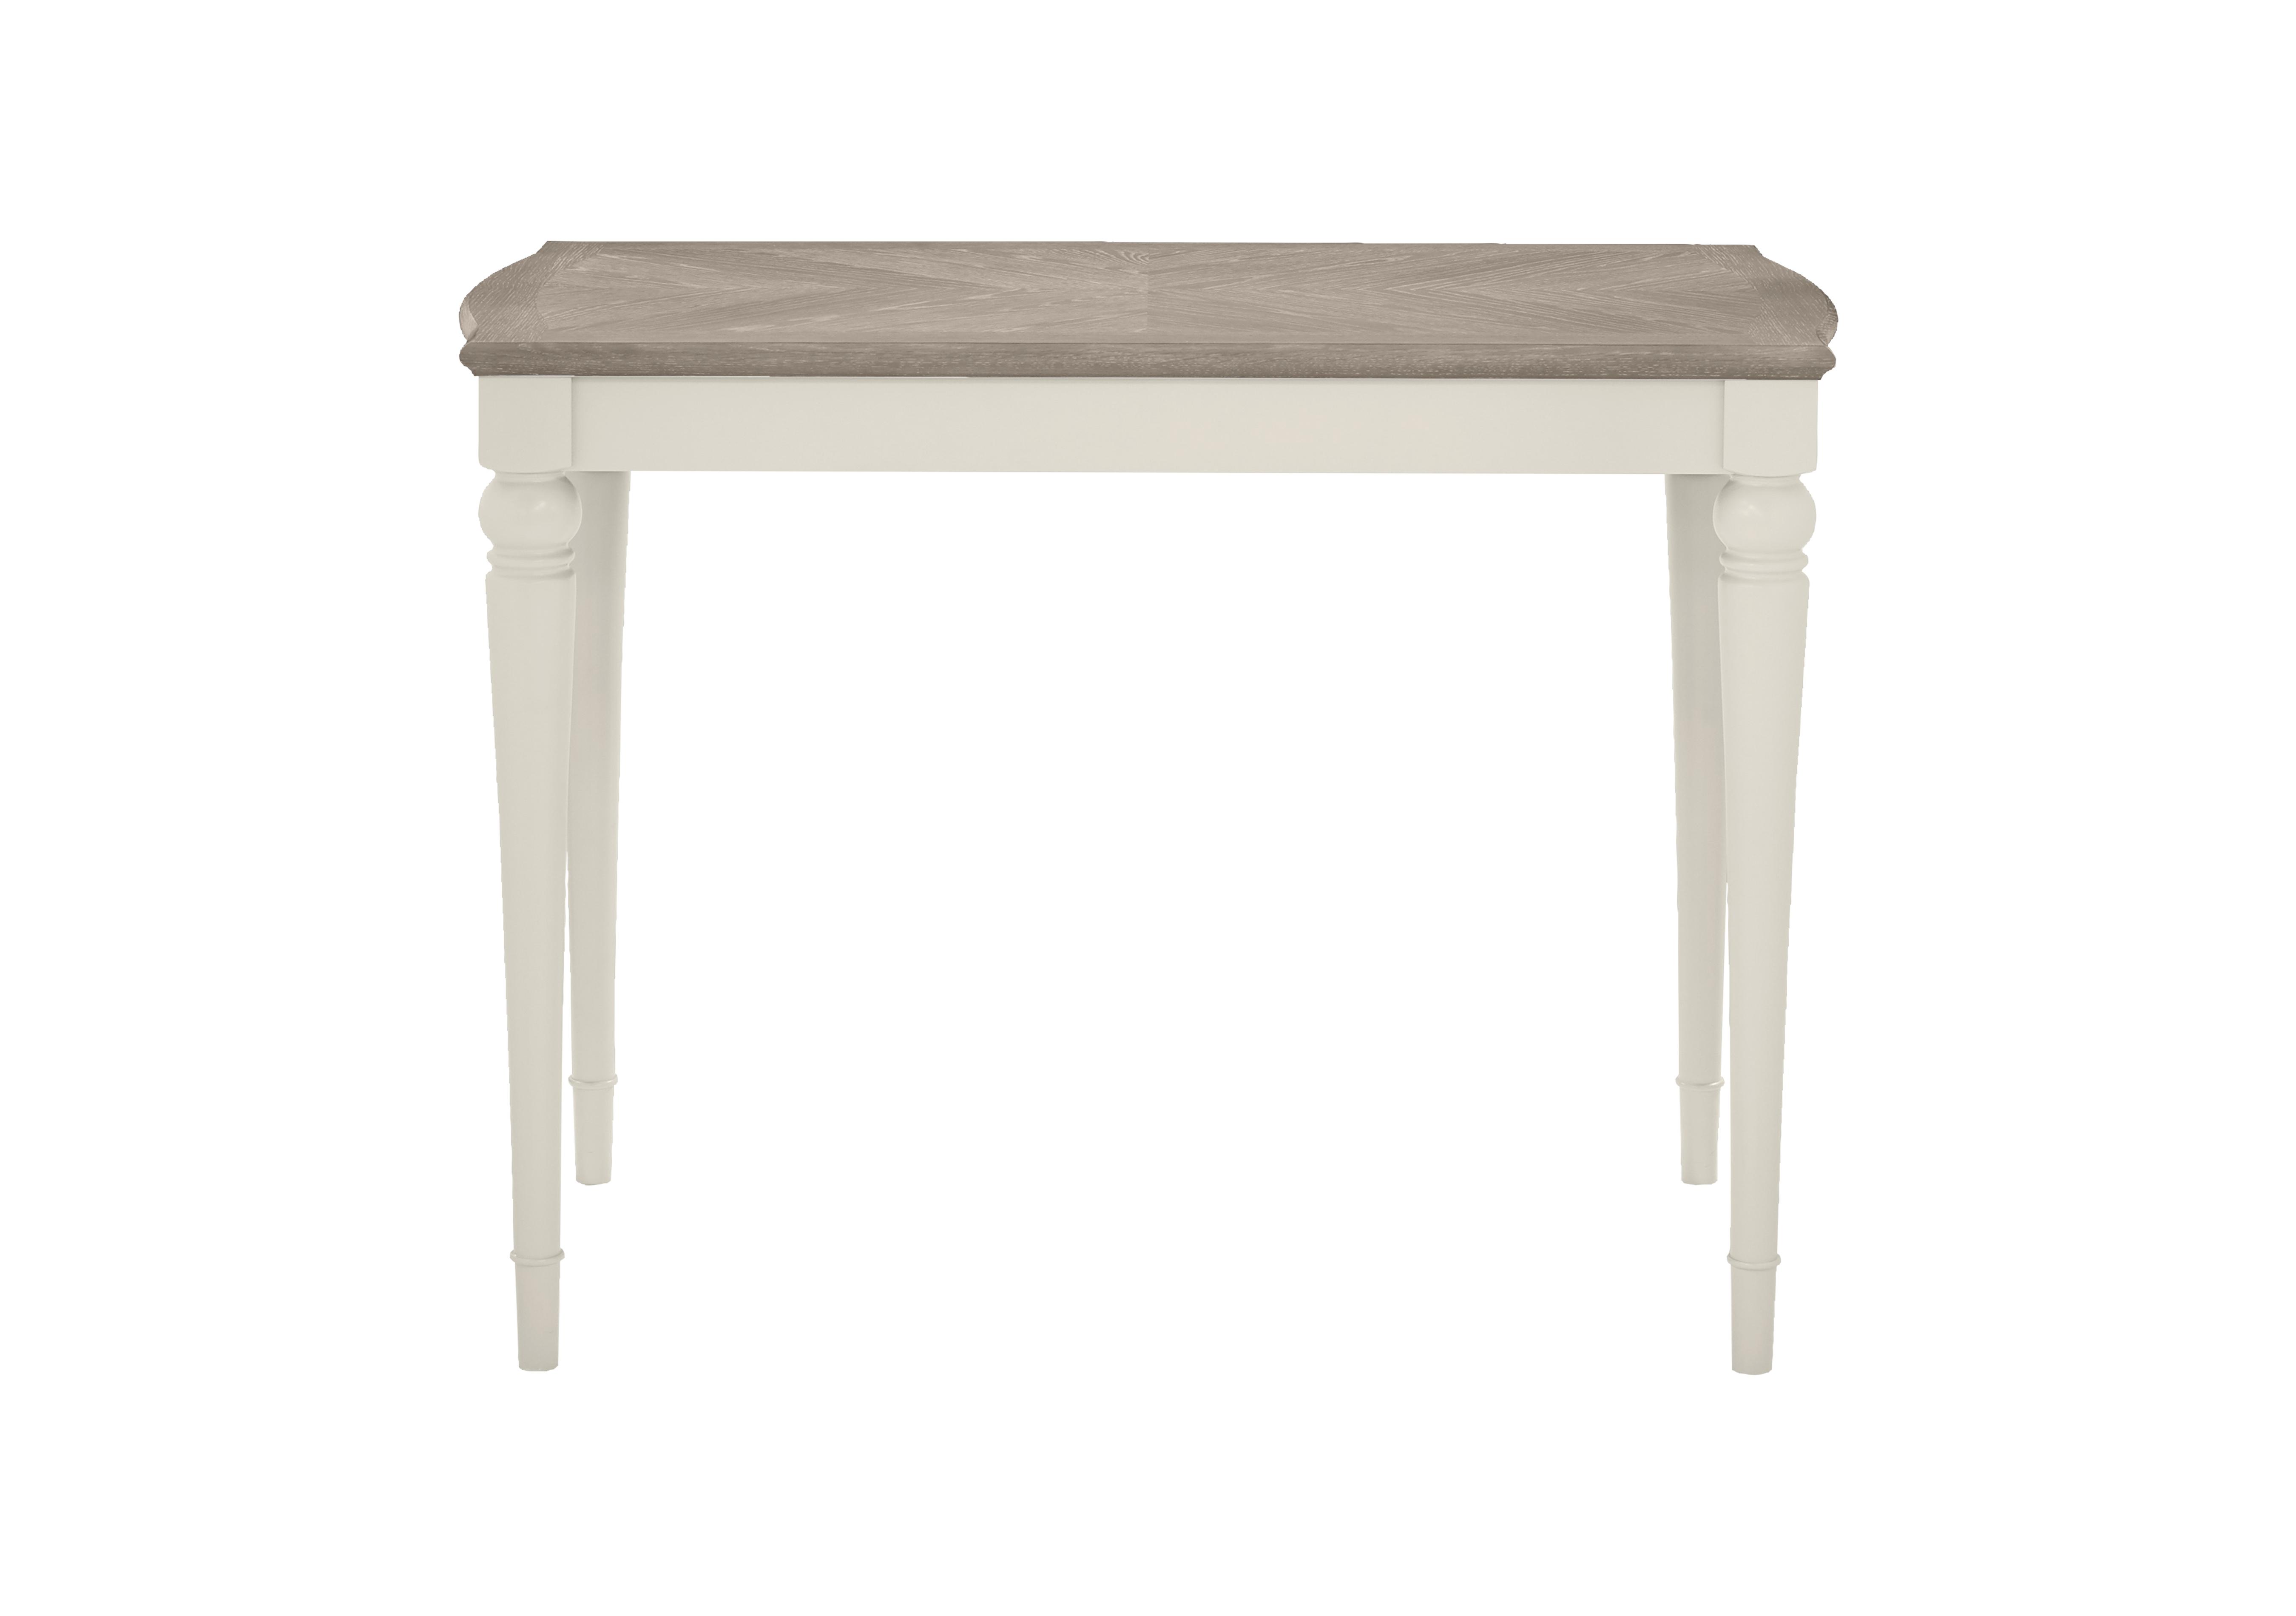 Annecy Bar Table in Soft Grey Paint on Furniture Village